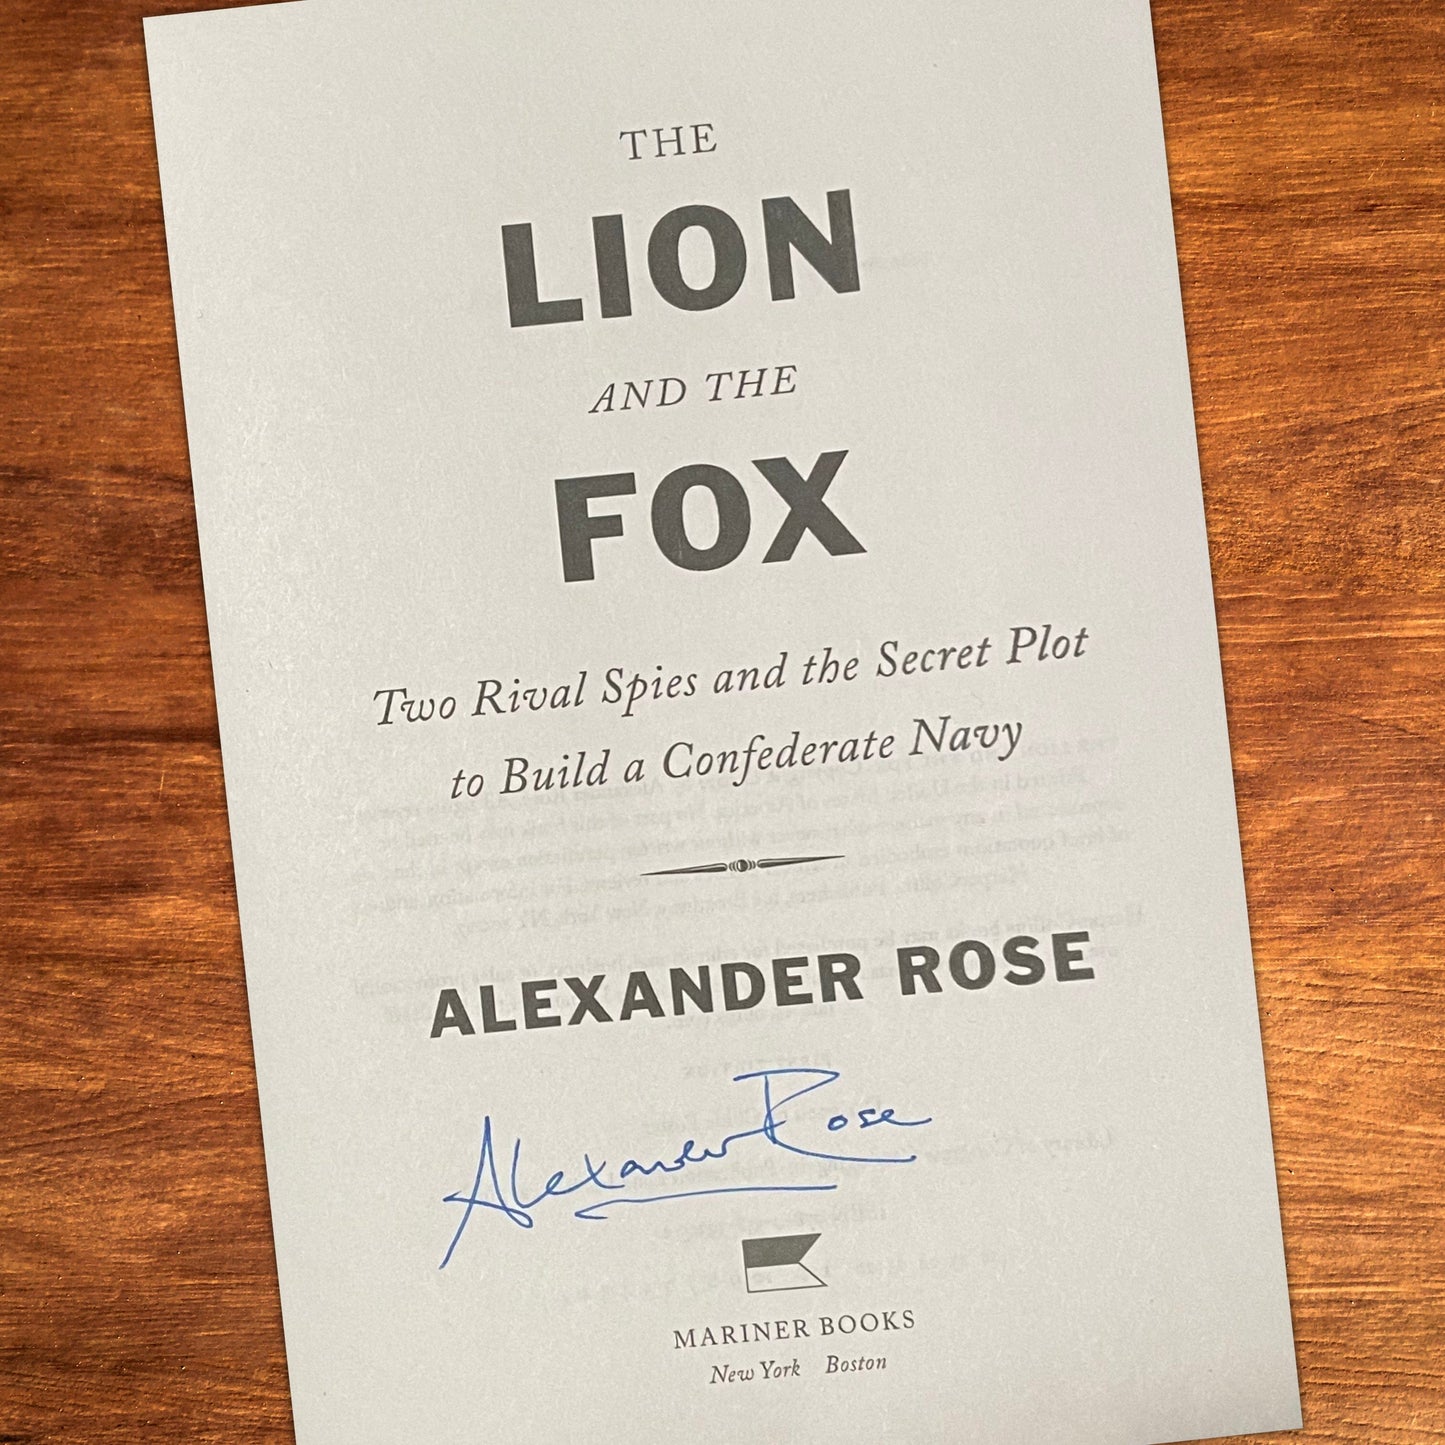 "The Lion and the Fox: Two Rival Spies and the Secret Plot to Build a Confederate Navy" - Signed by the author Alexander Rose